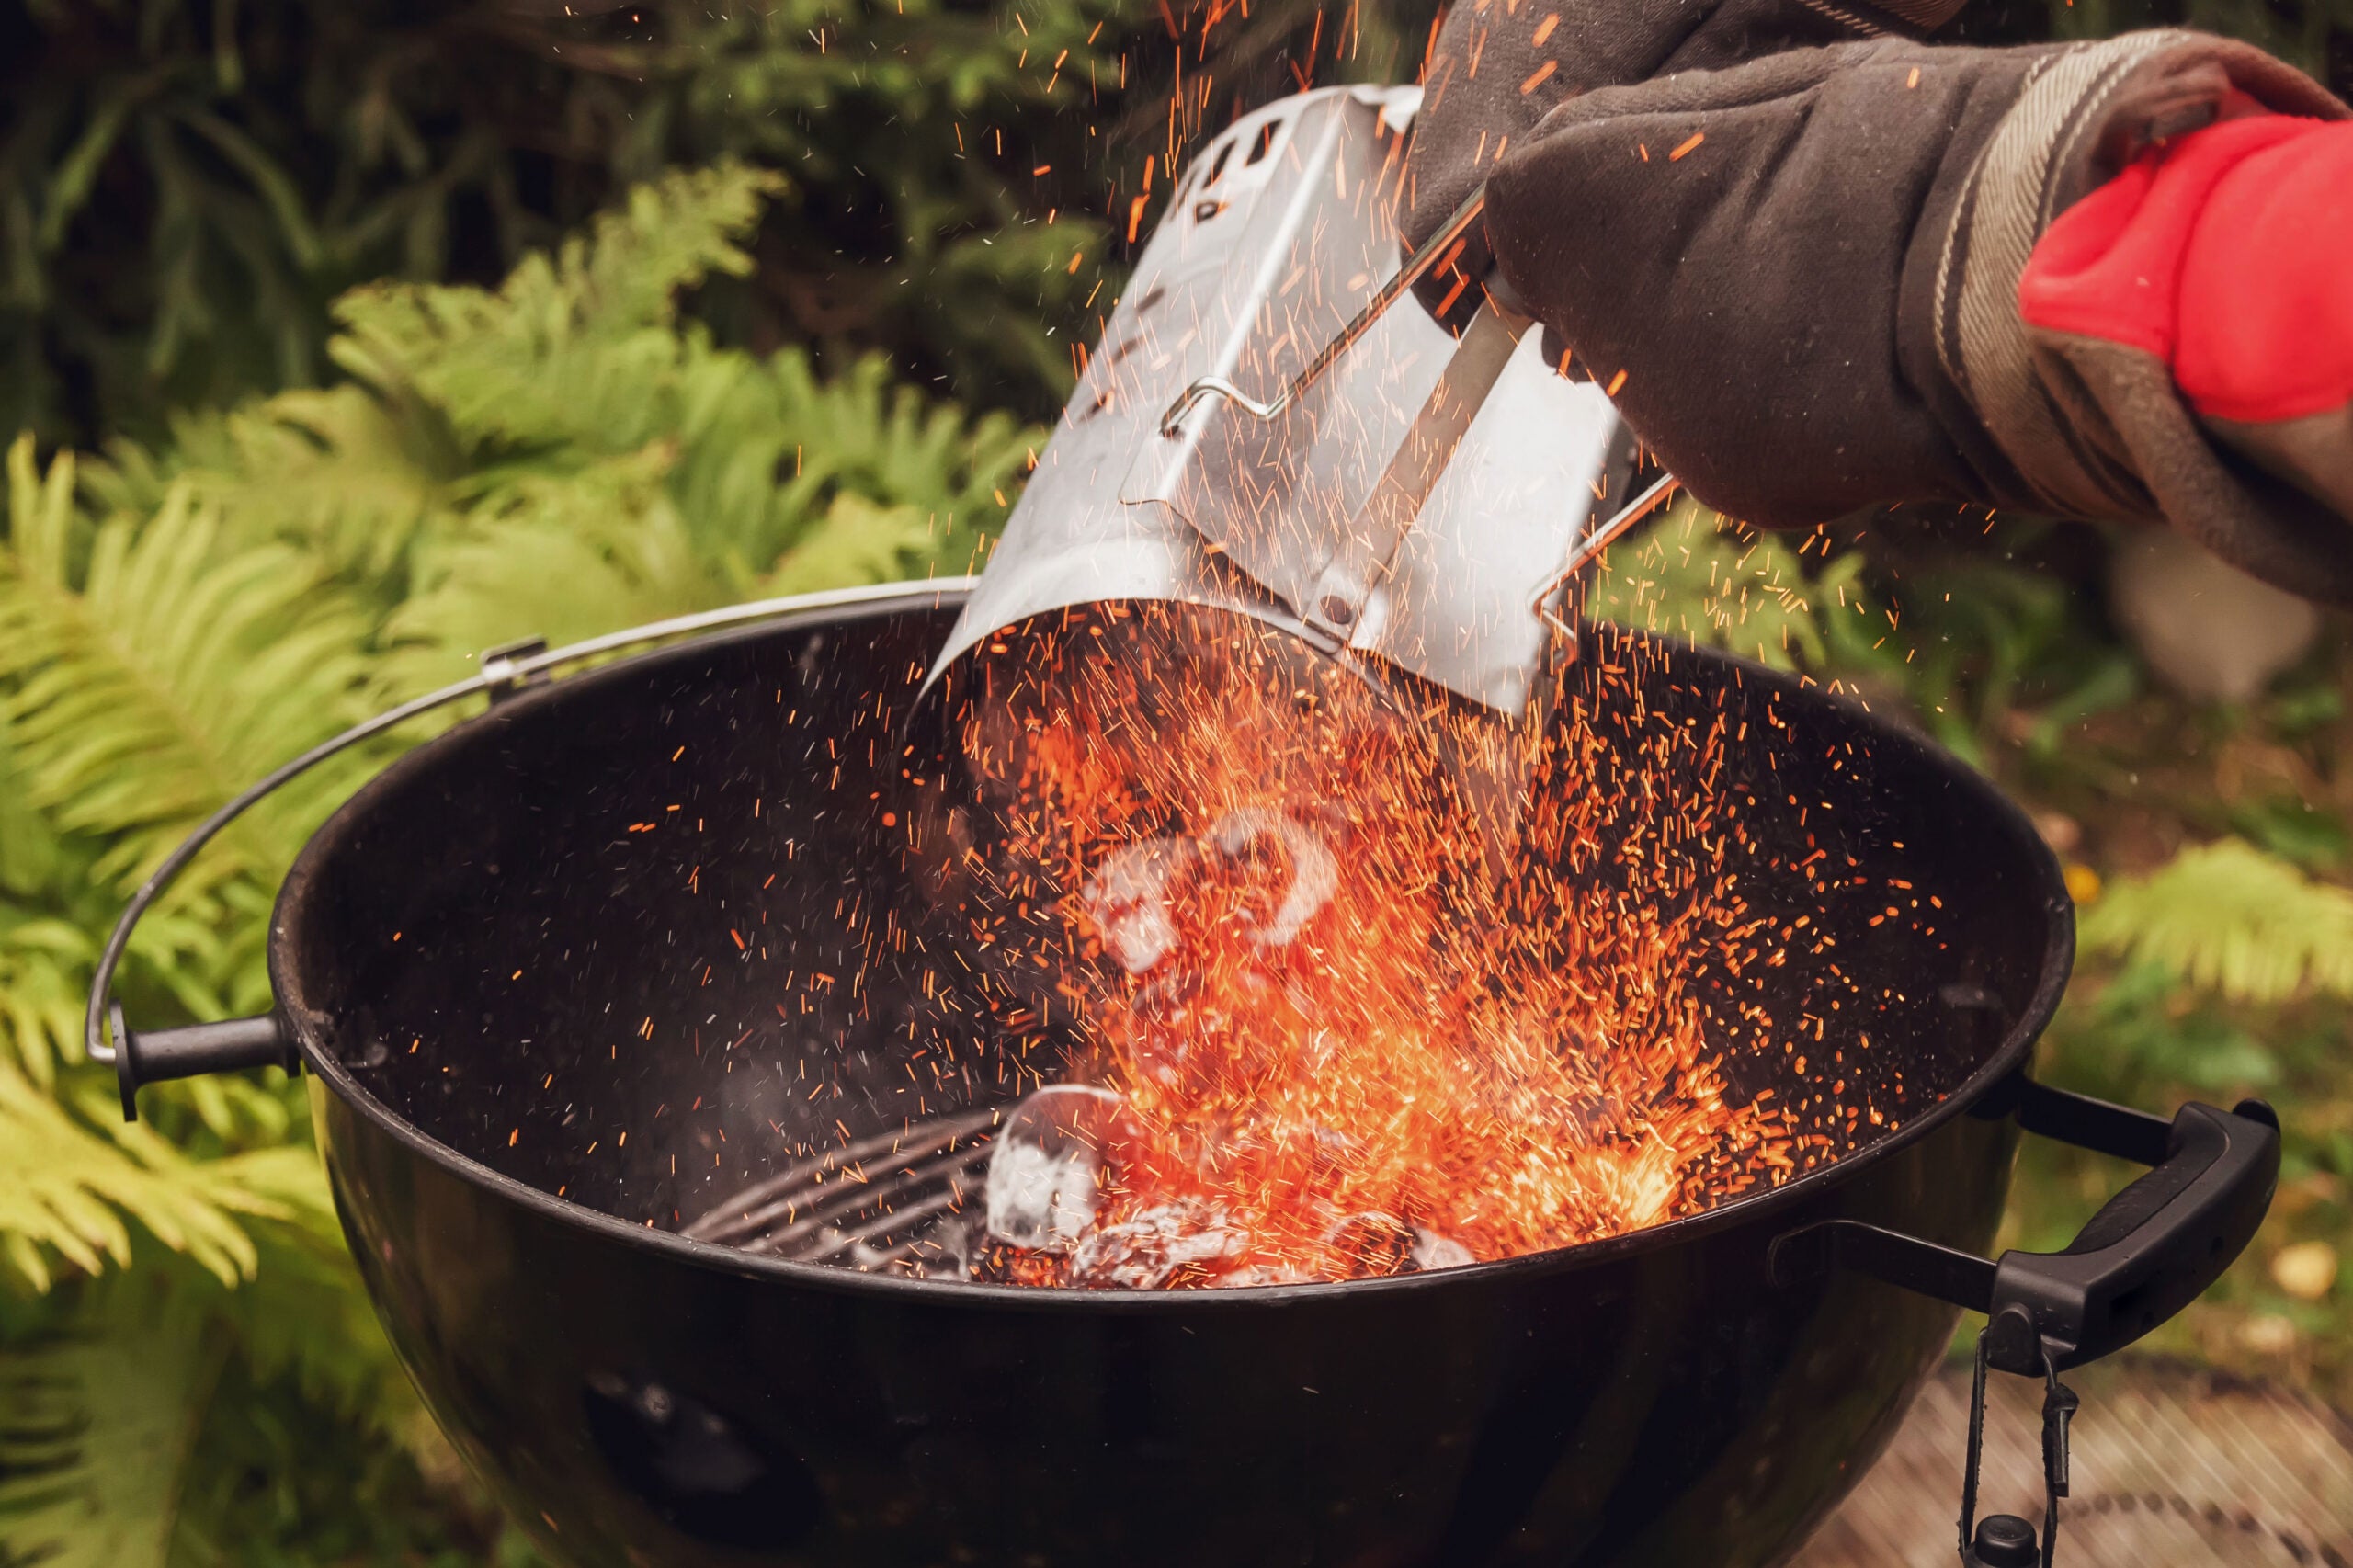 Five Best BBQ Gifts for Grilling Lovers